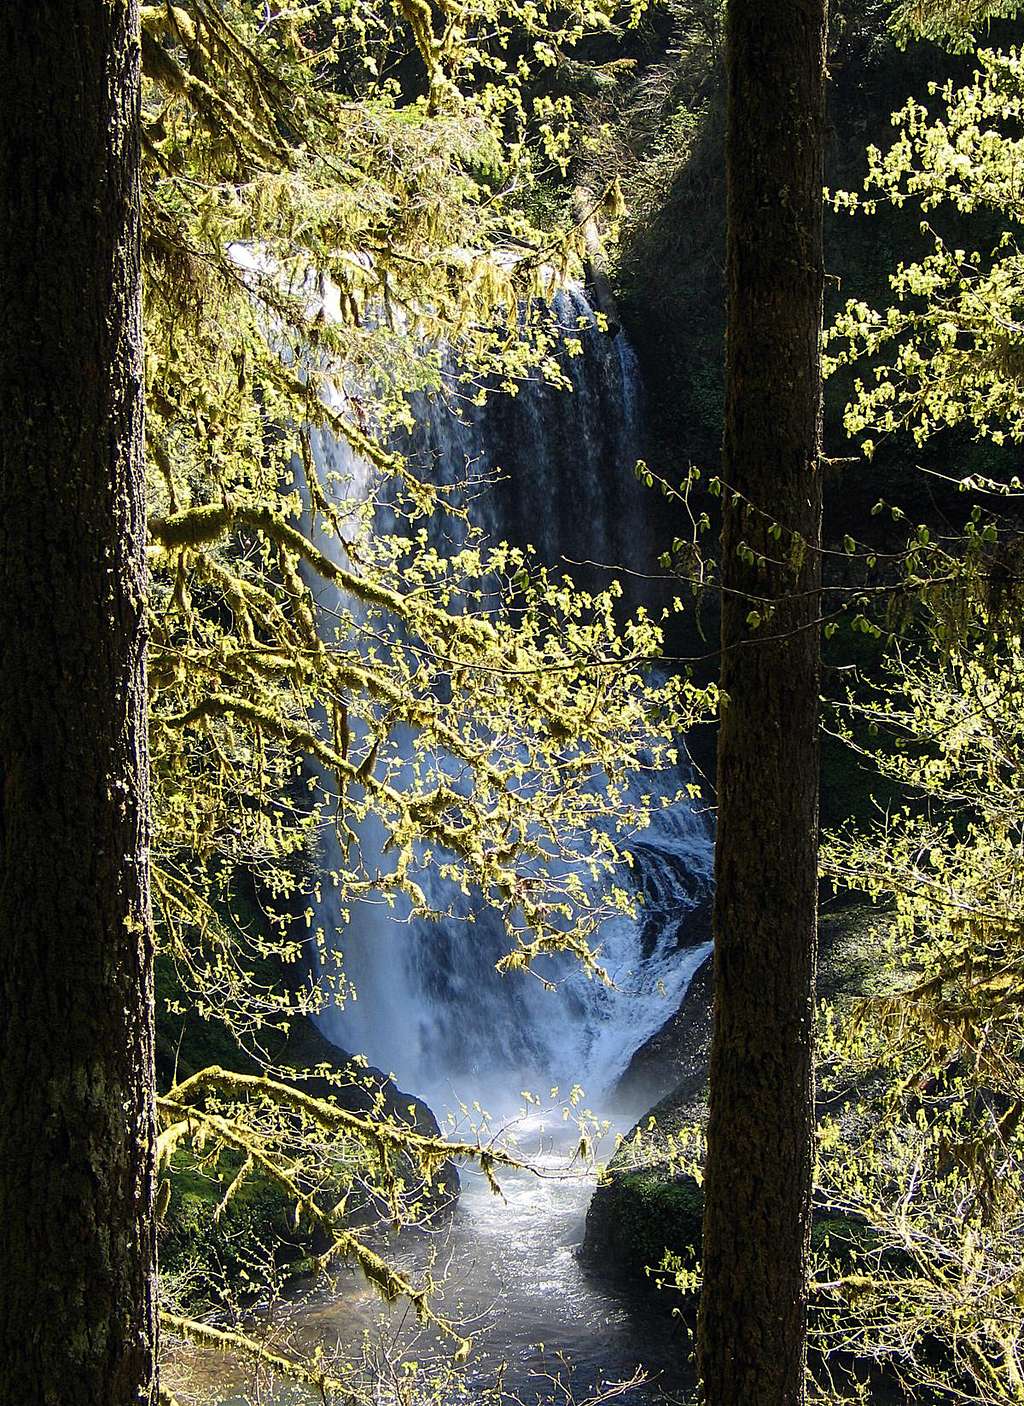 Middle North Falls through the trees